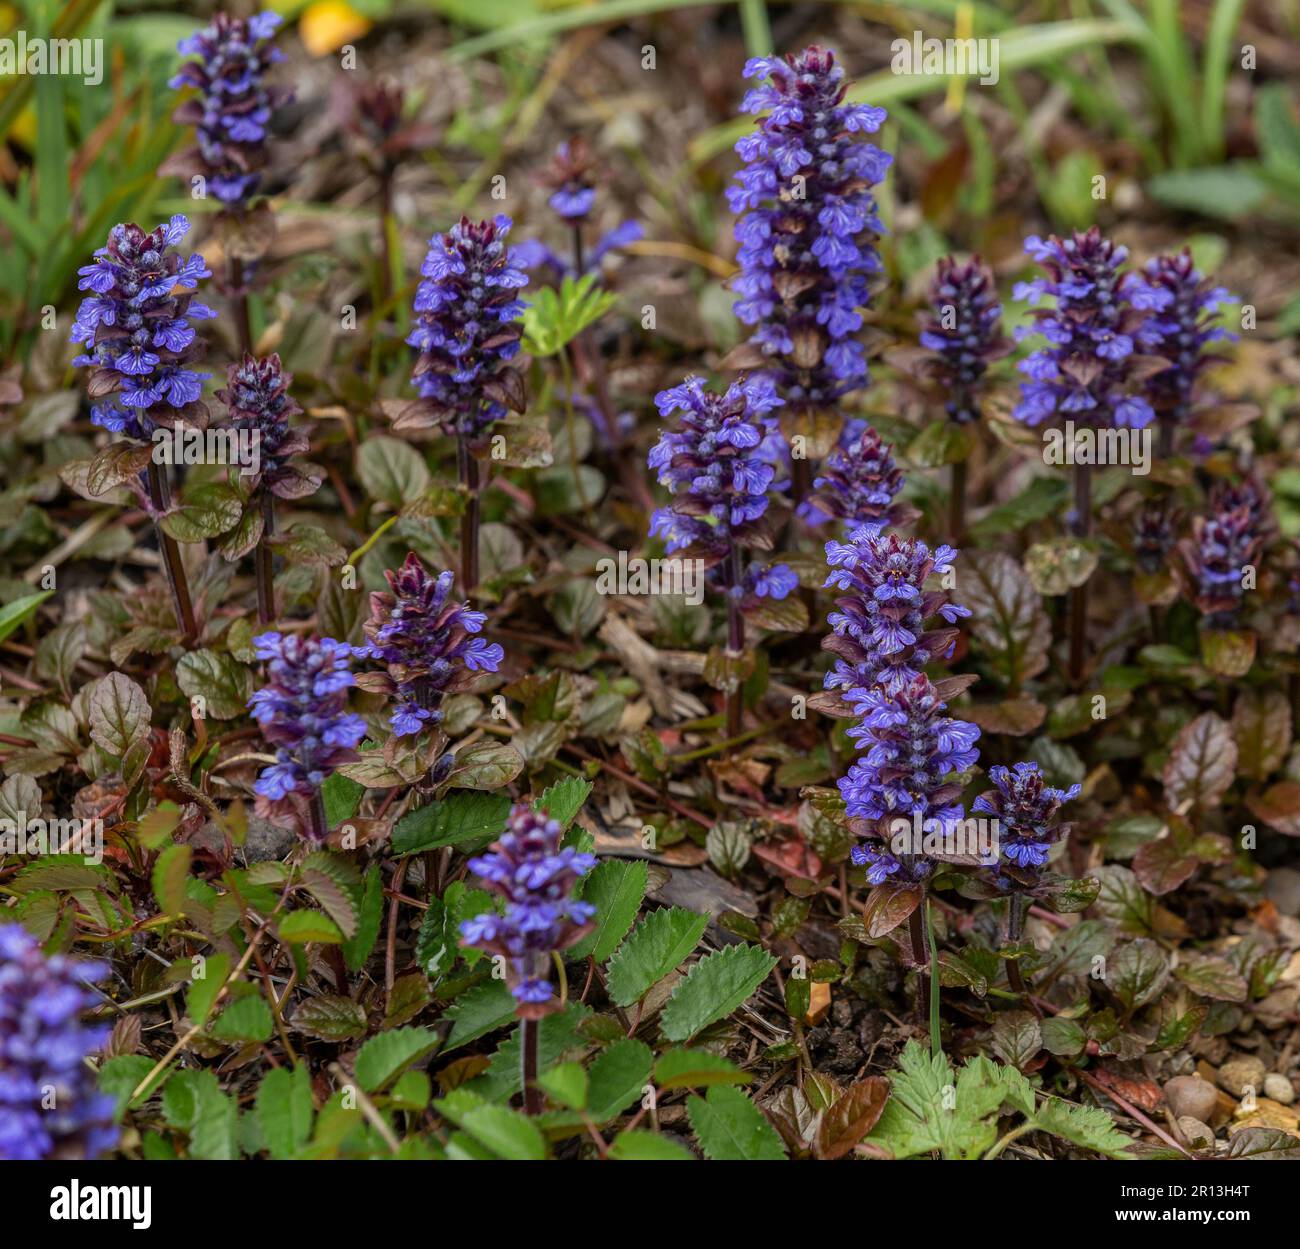 Ajuga Reptans 'Catlin's Giant' flowers. Also known as Bugle or Bugleherb. Stock Photo